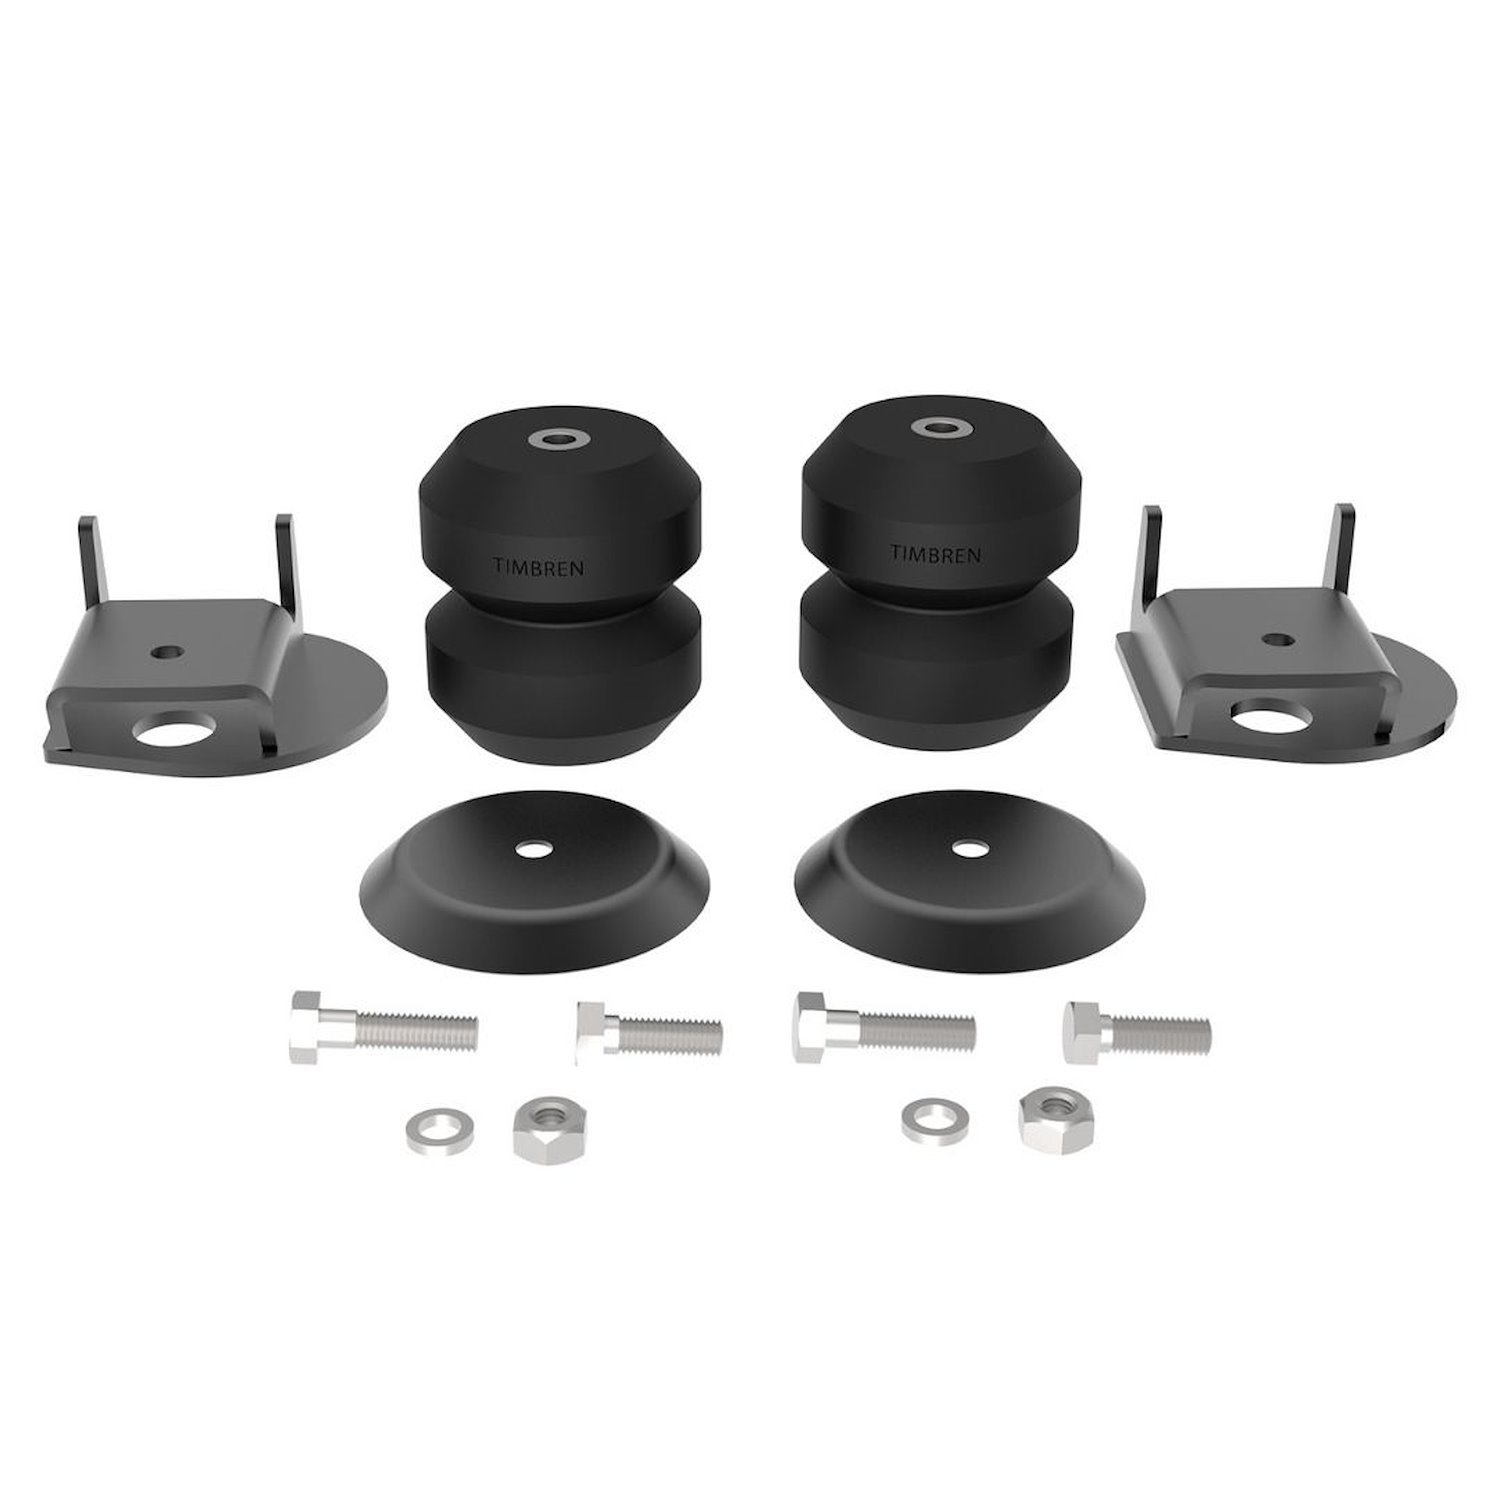 ABSFR150RC Active Off-Road Bumpstops for Select 3rd Gen Ford F150 Raptor, Rear Kit